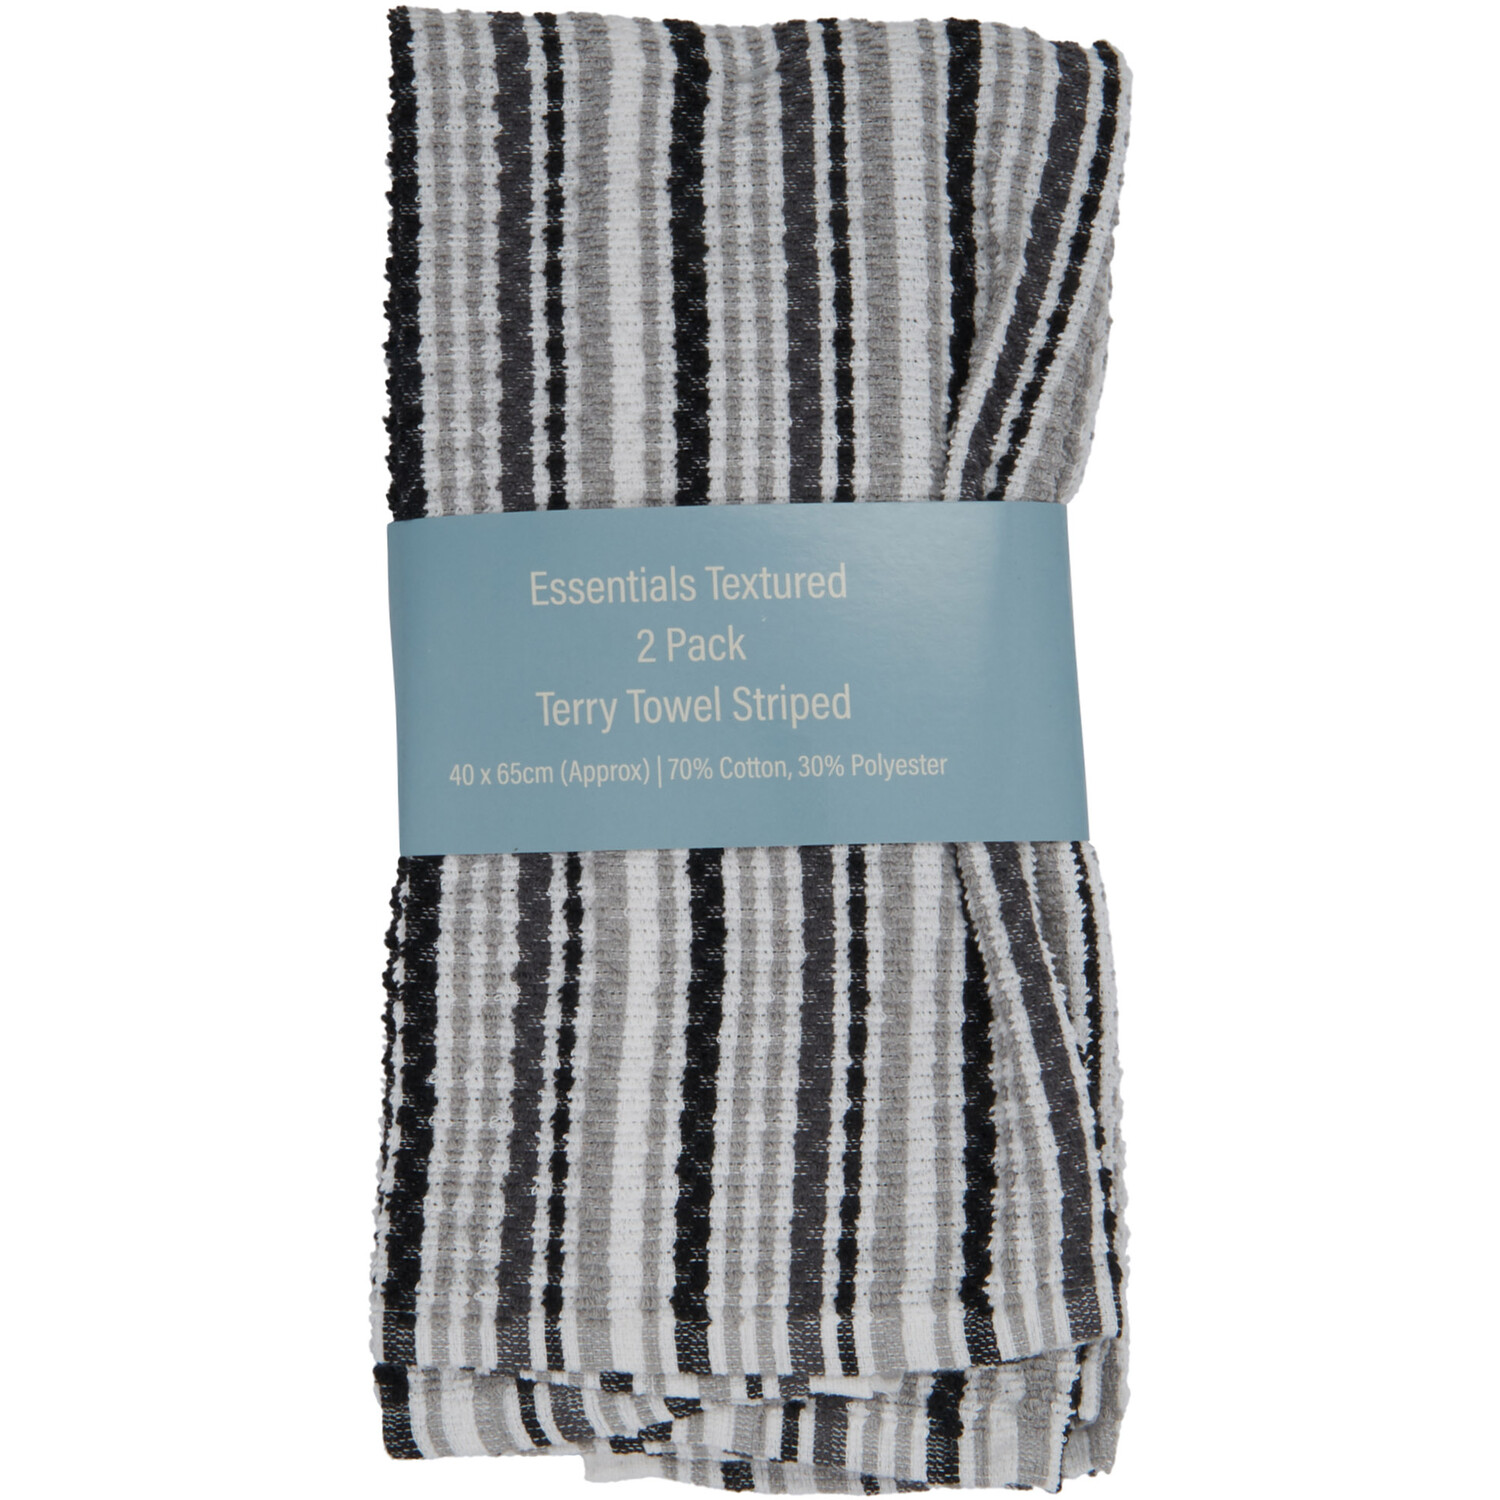 Essentials Polycotton Grey Striped Textured Terry Towel 2 Pack Image 1